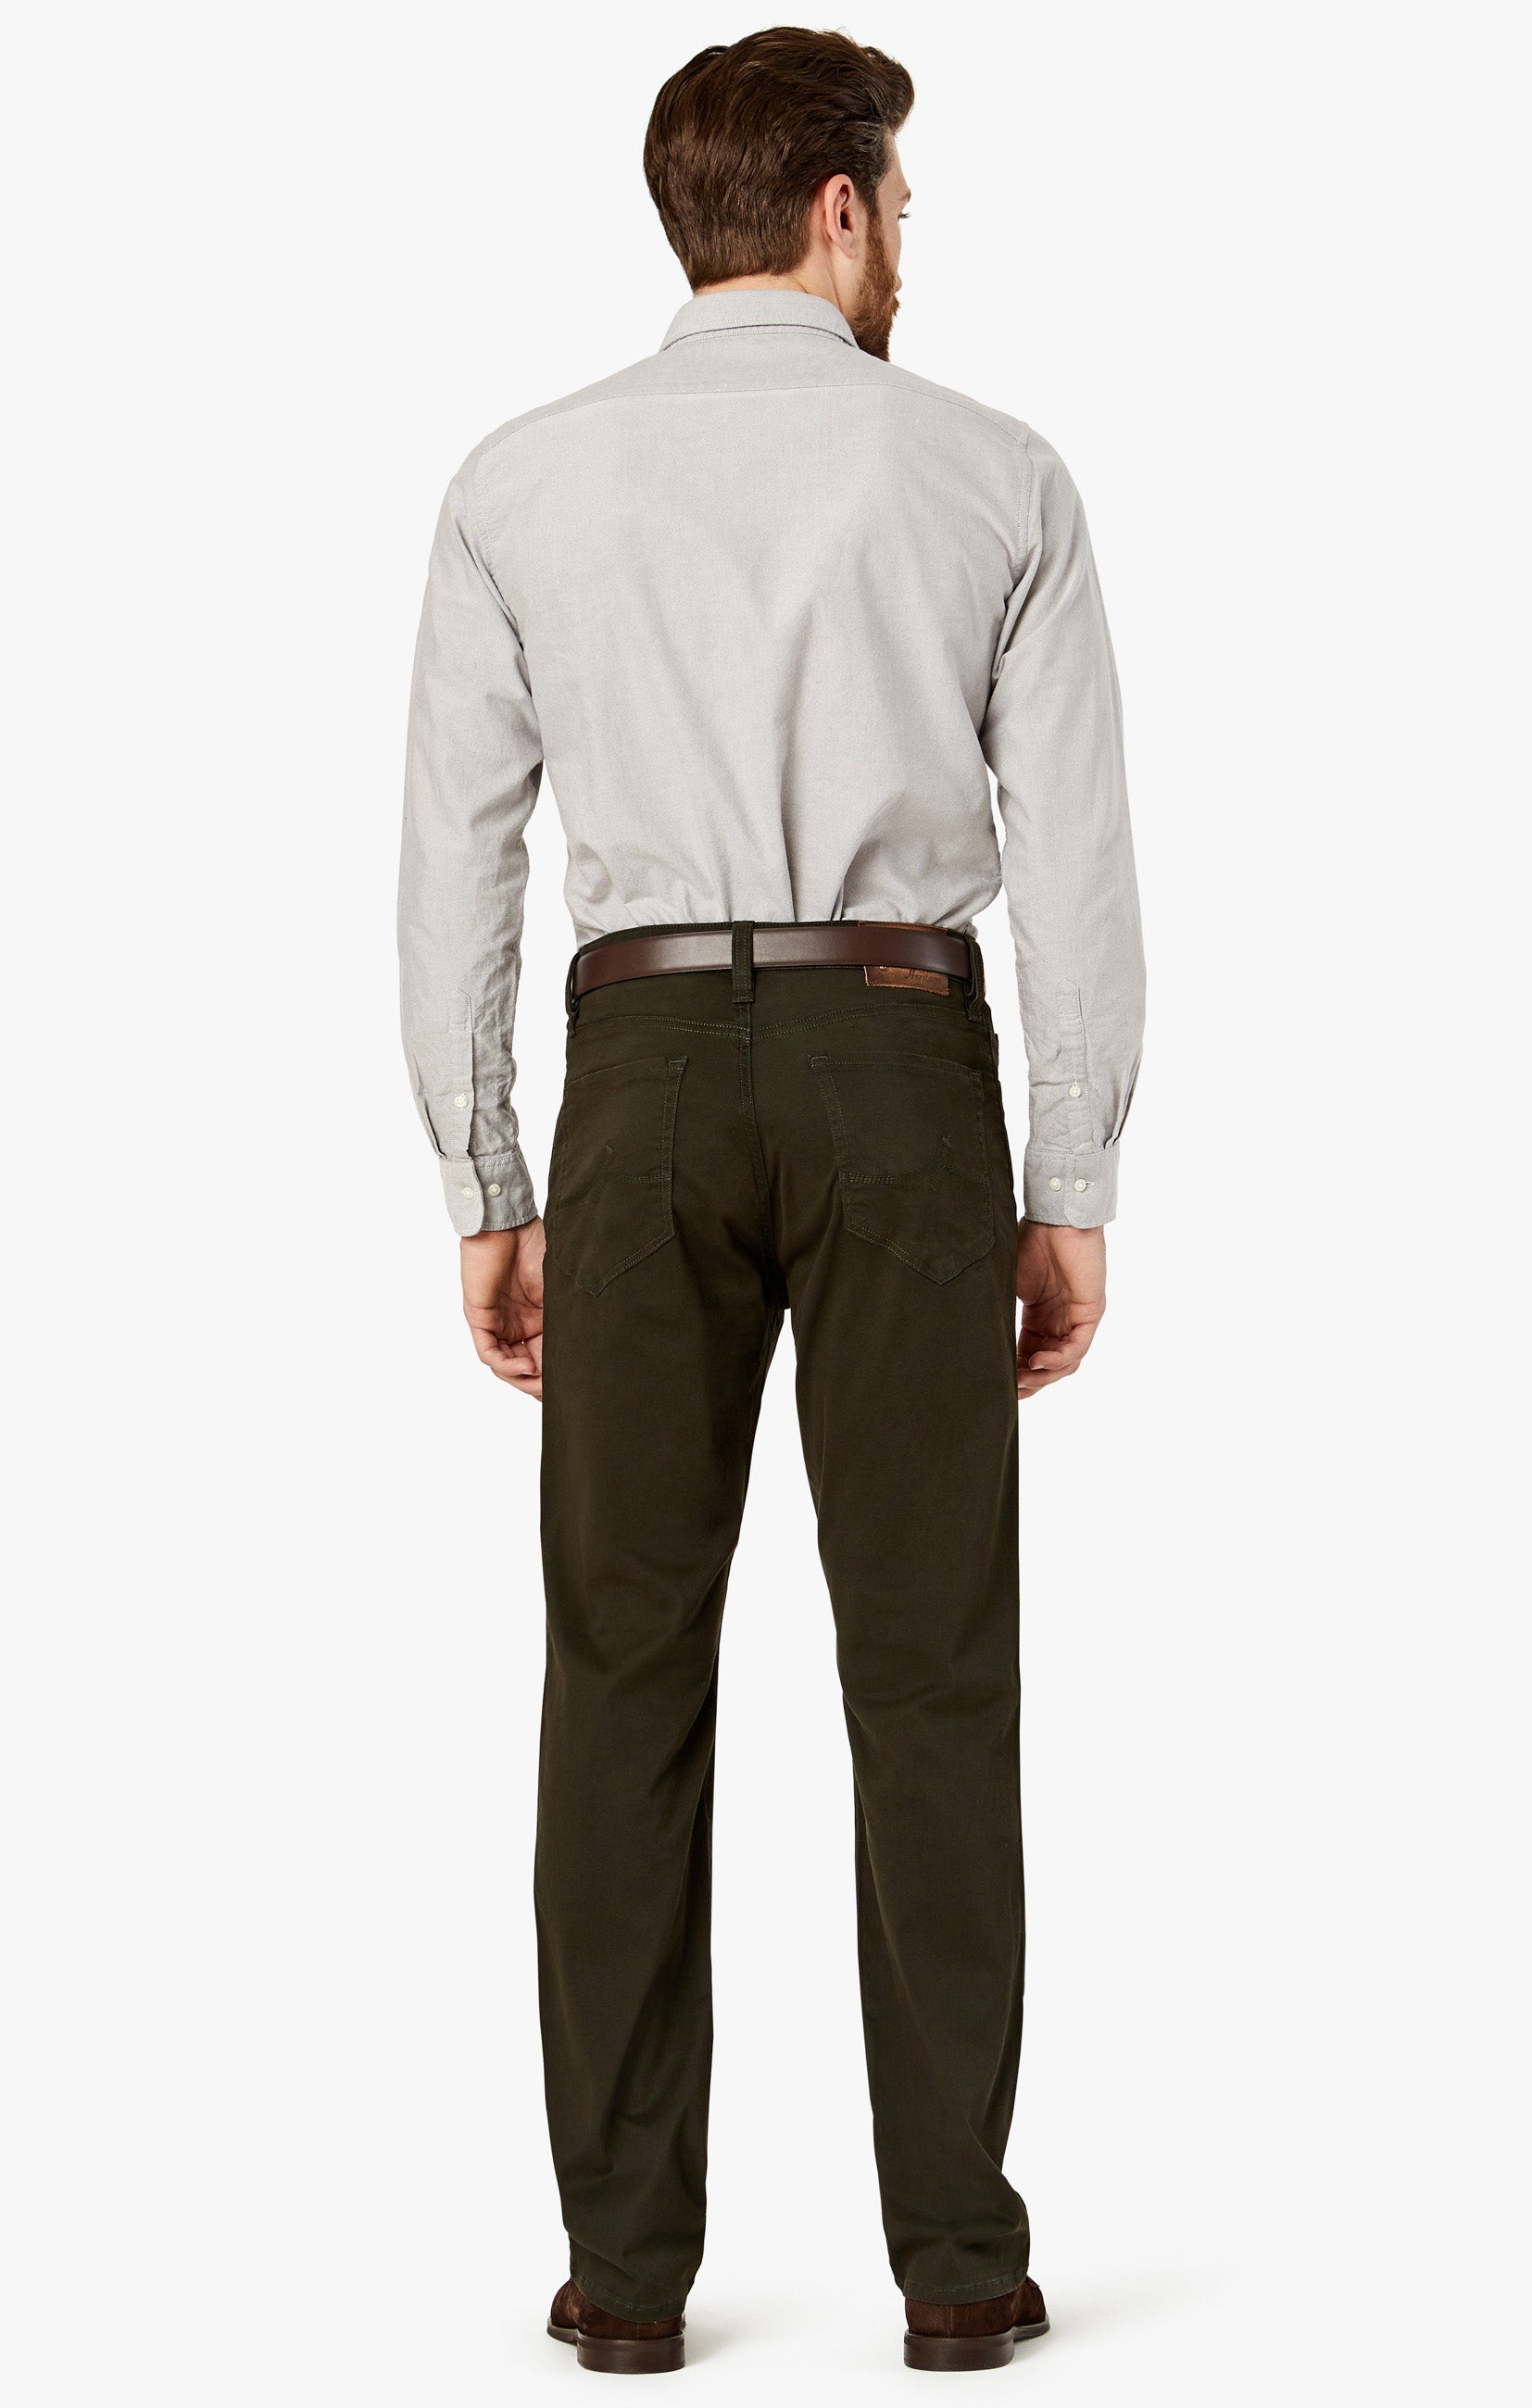 Charisma Relaxed Straight Pants in Dark Green Twill Image 6